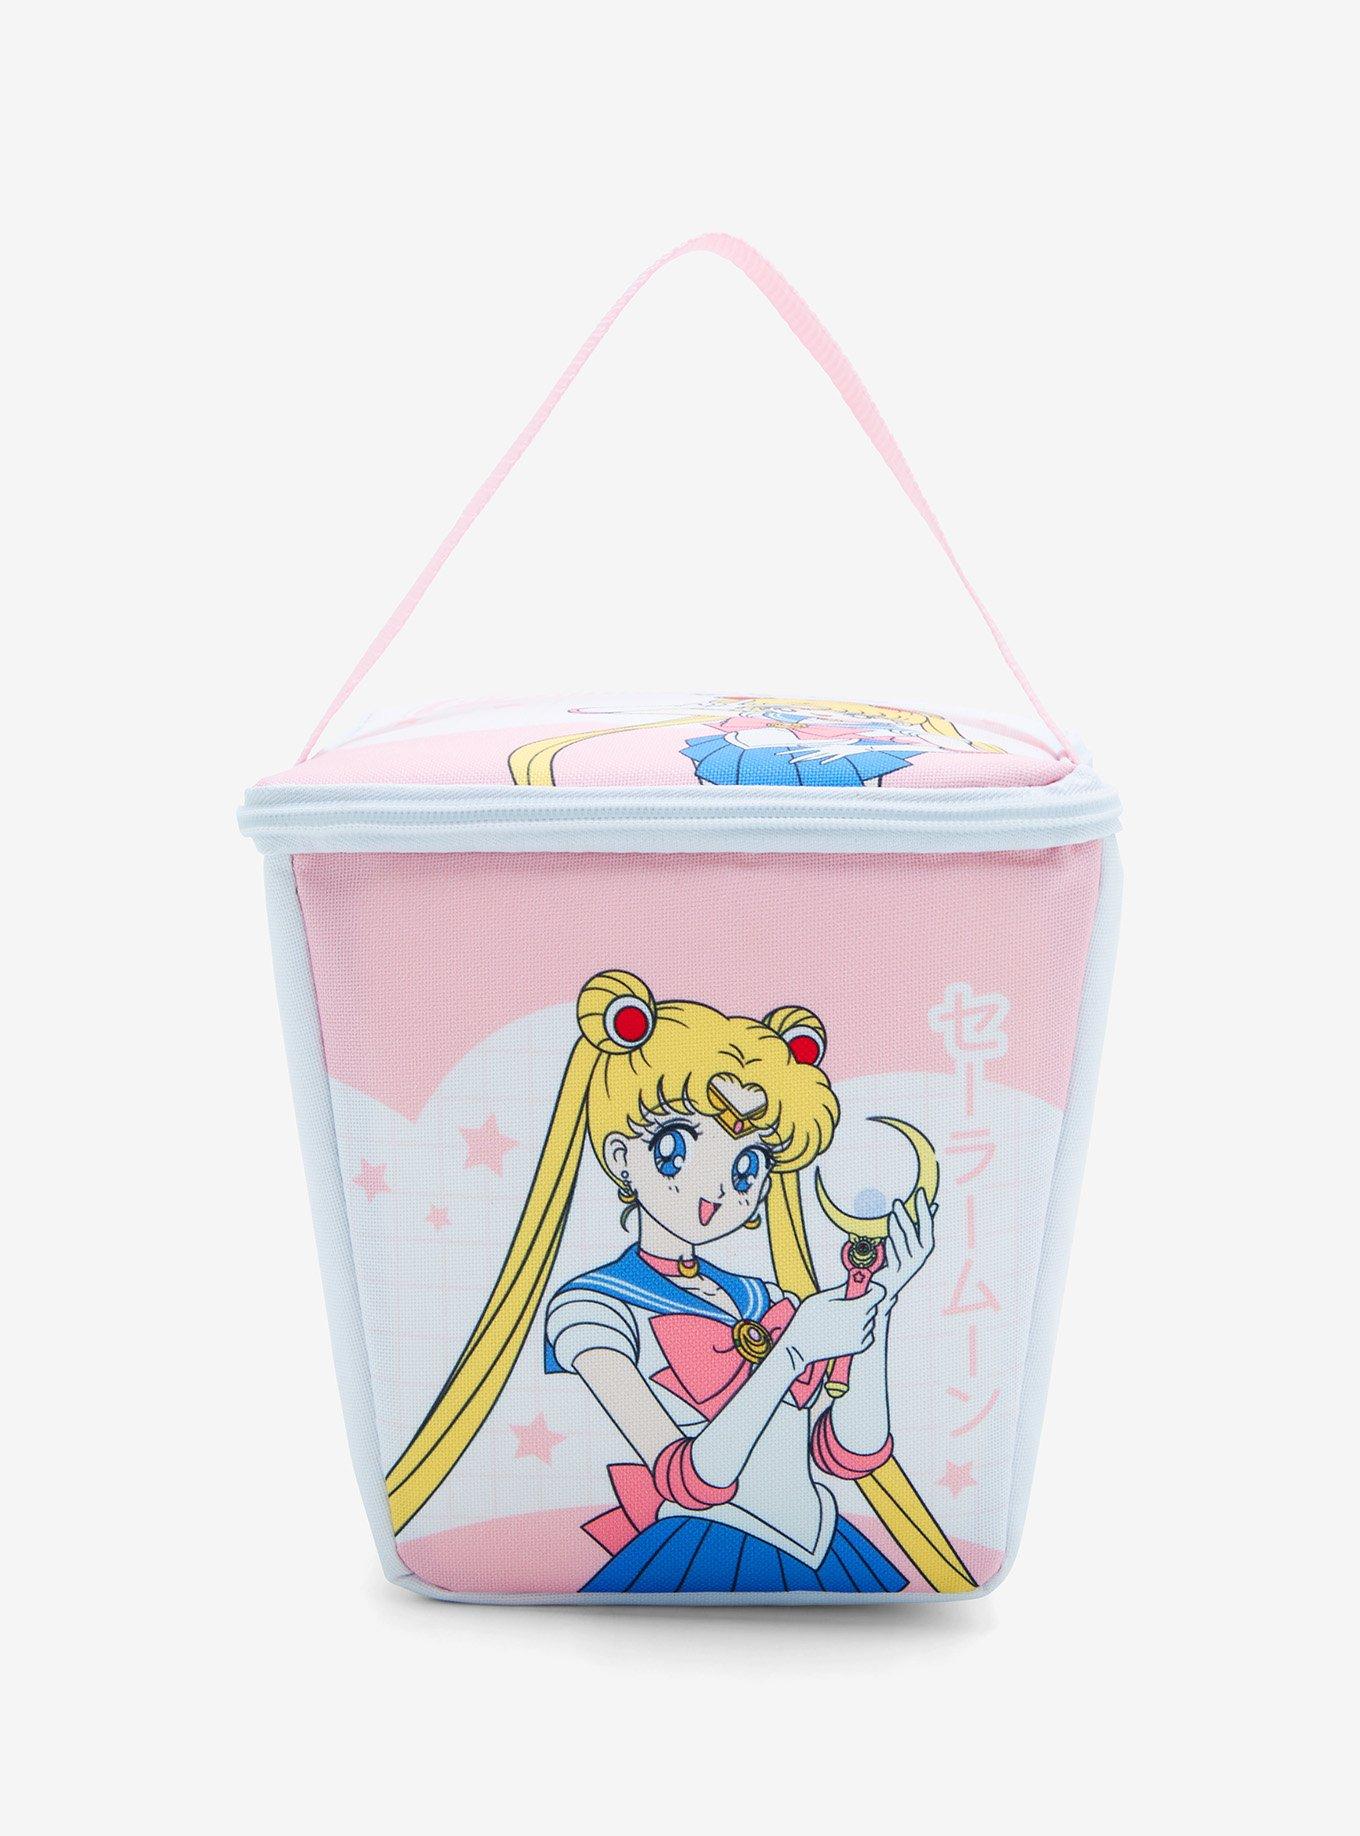 Lunch Boxes Kids Cartoon, Plastic Lunch Containers